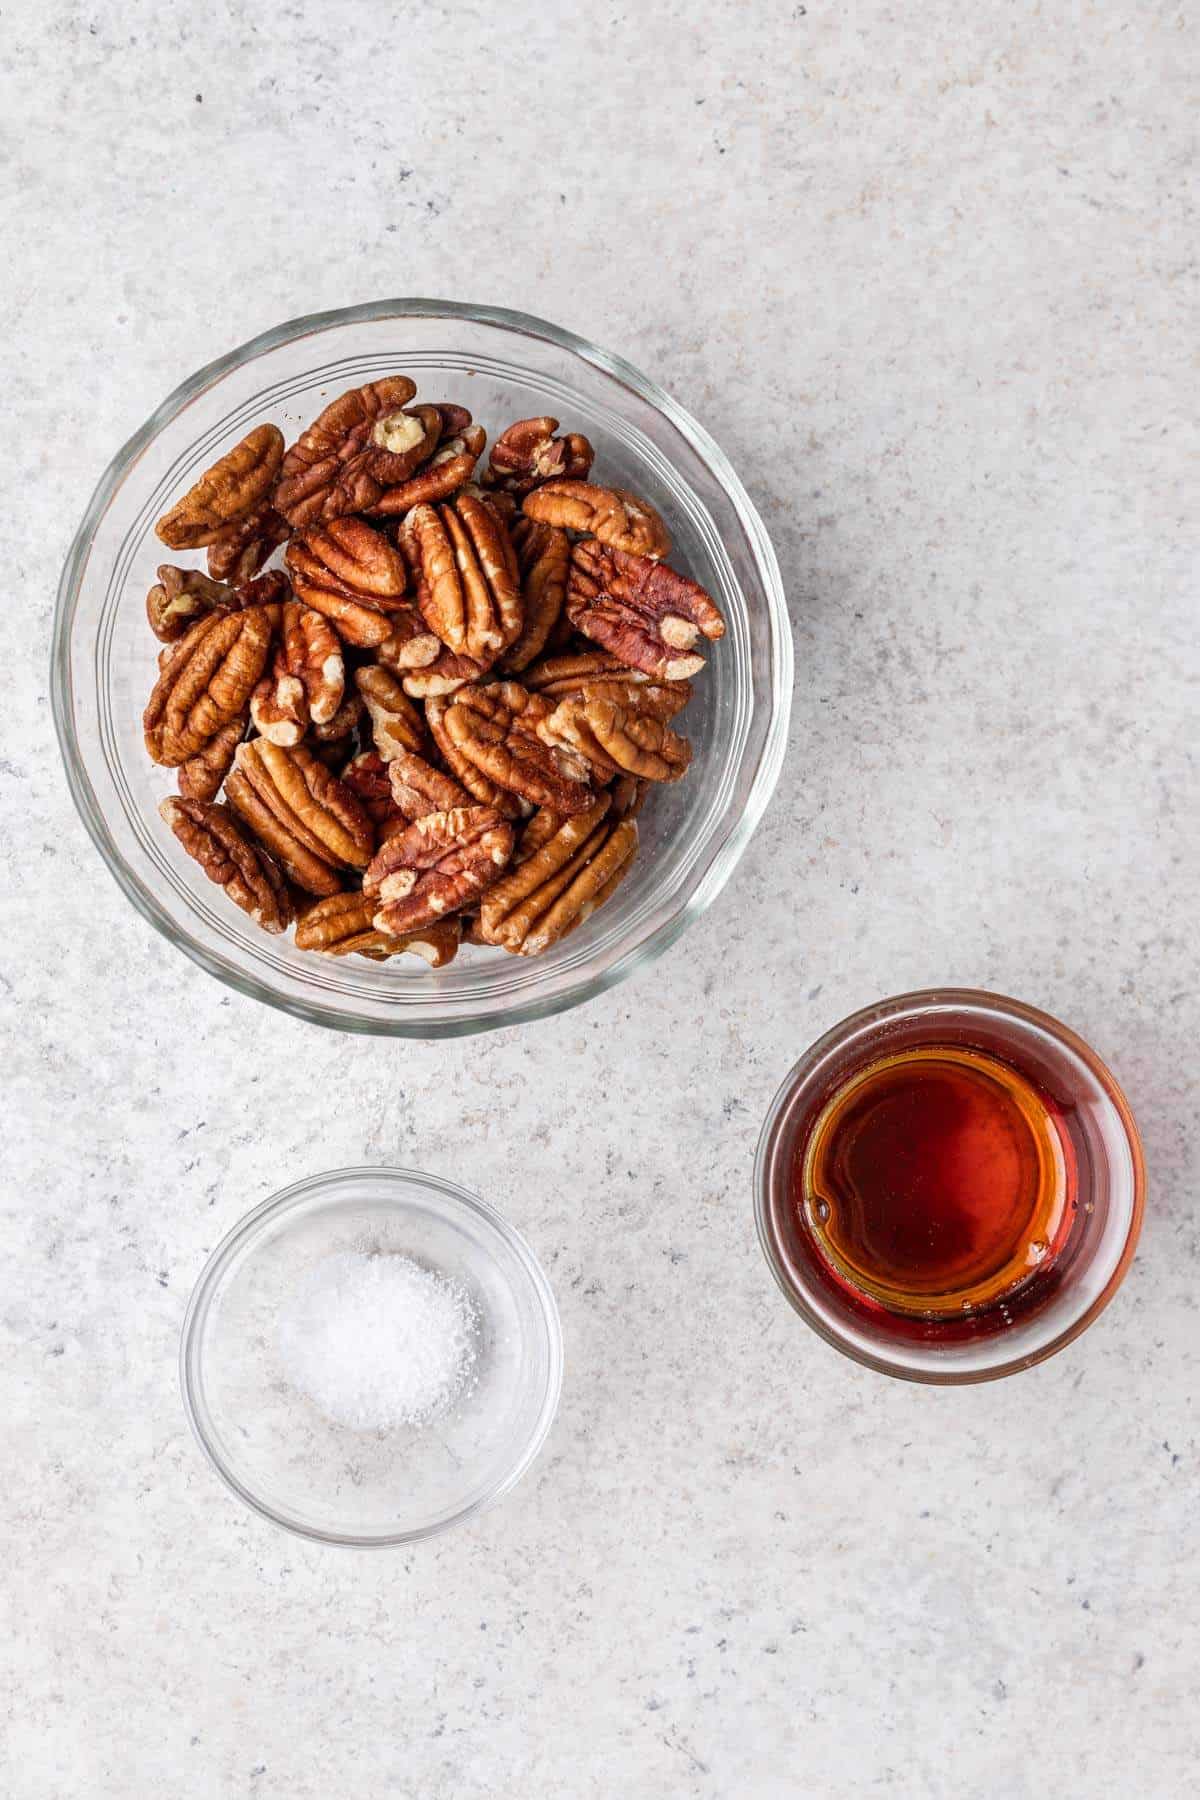 Pecans, maple syrup, and salt measured in individual glass bowls.